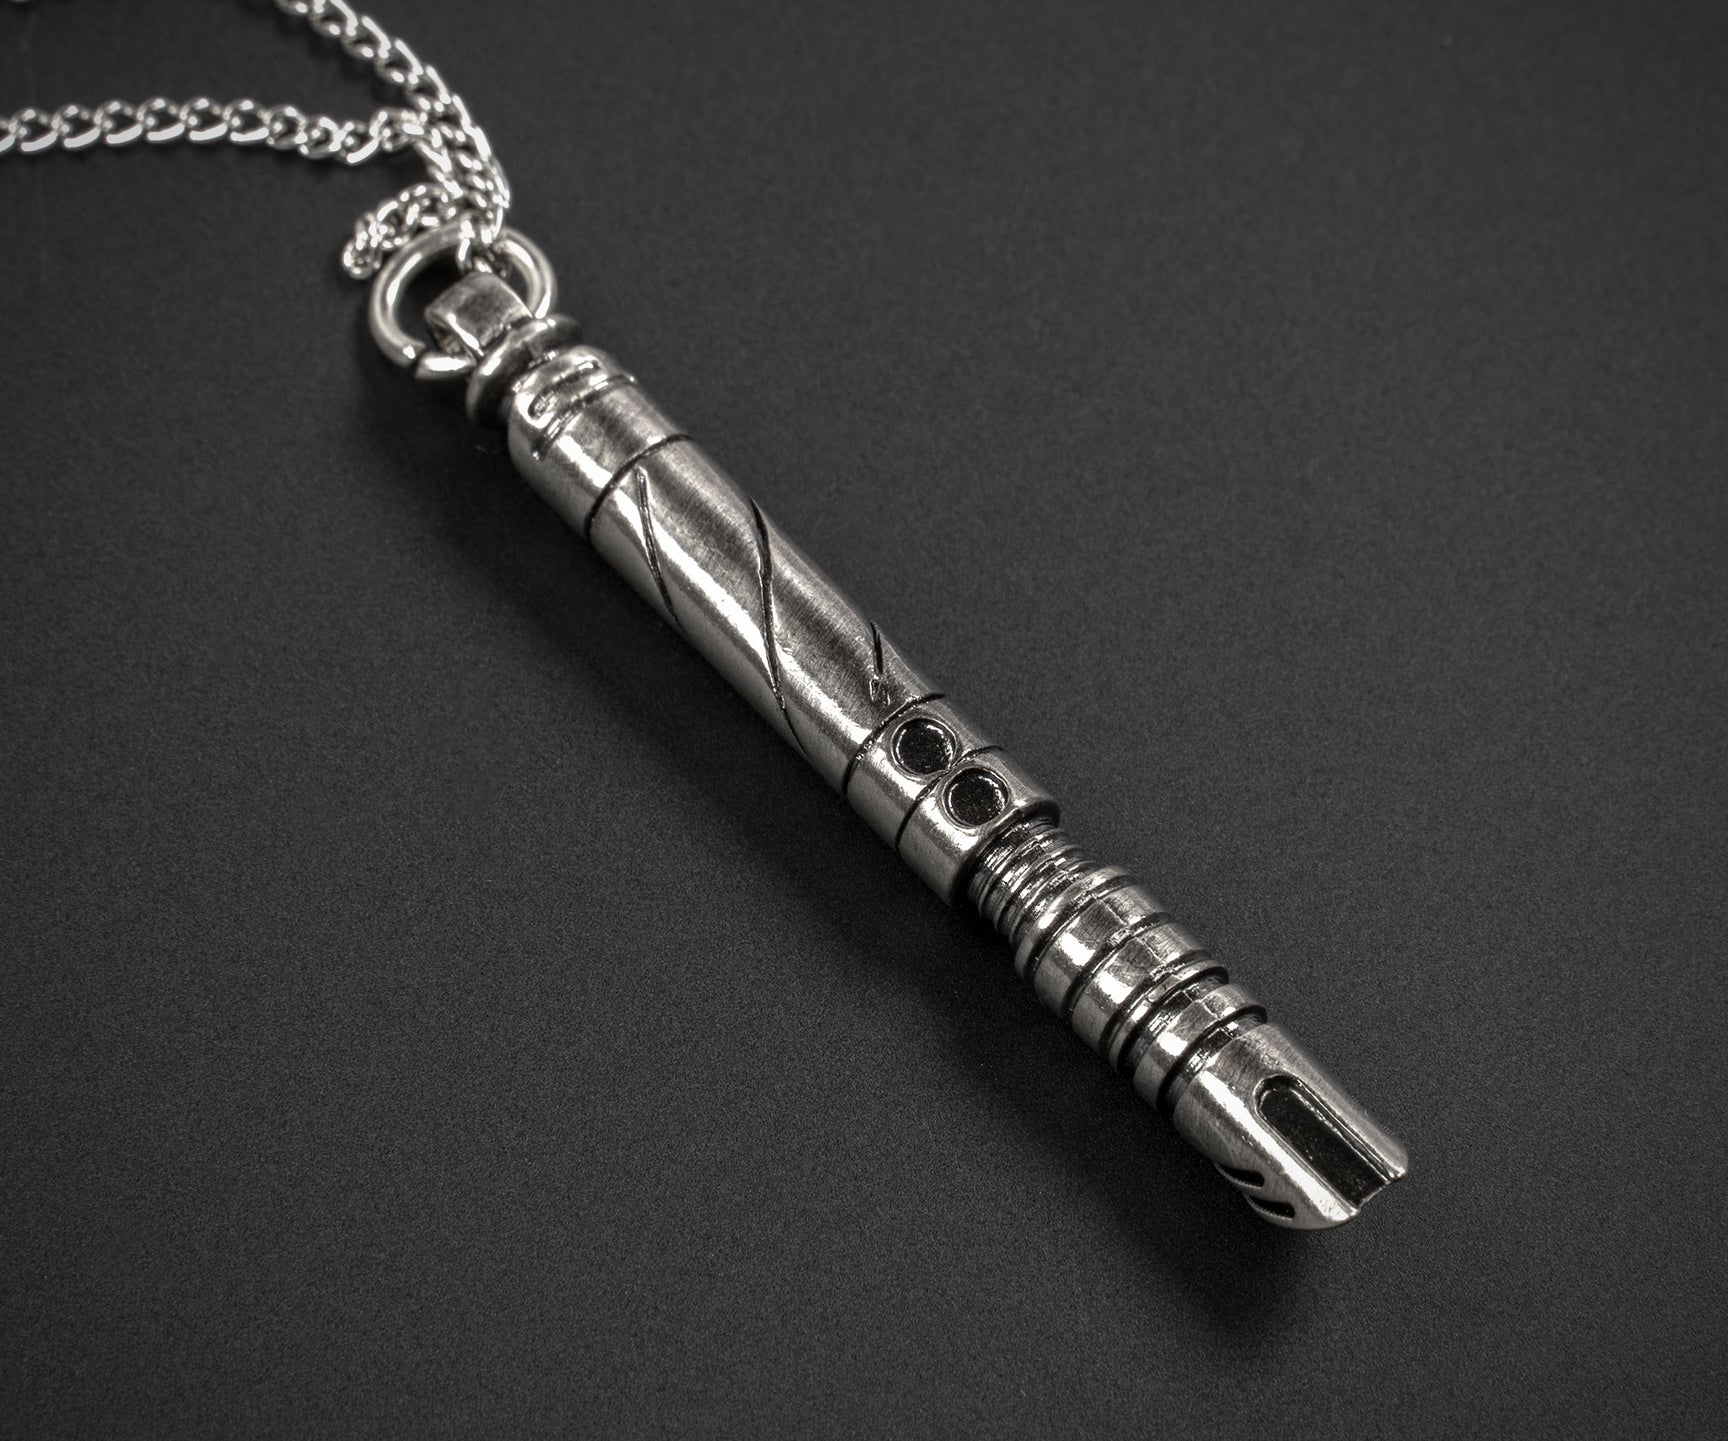 Star Wars Necklaces from Short Story - SWNZ, Star Wars New Zealand